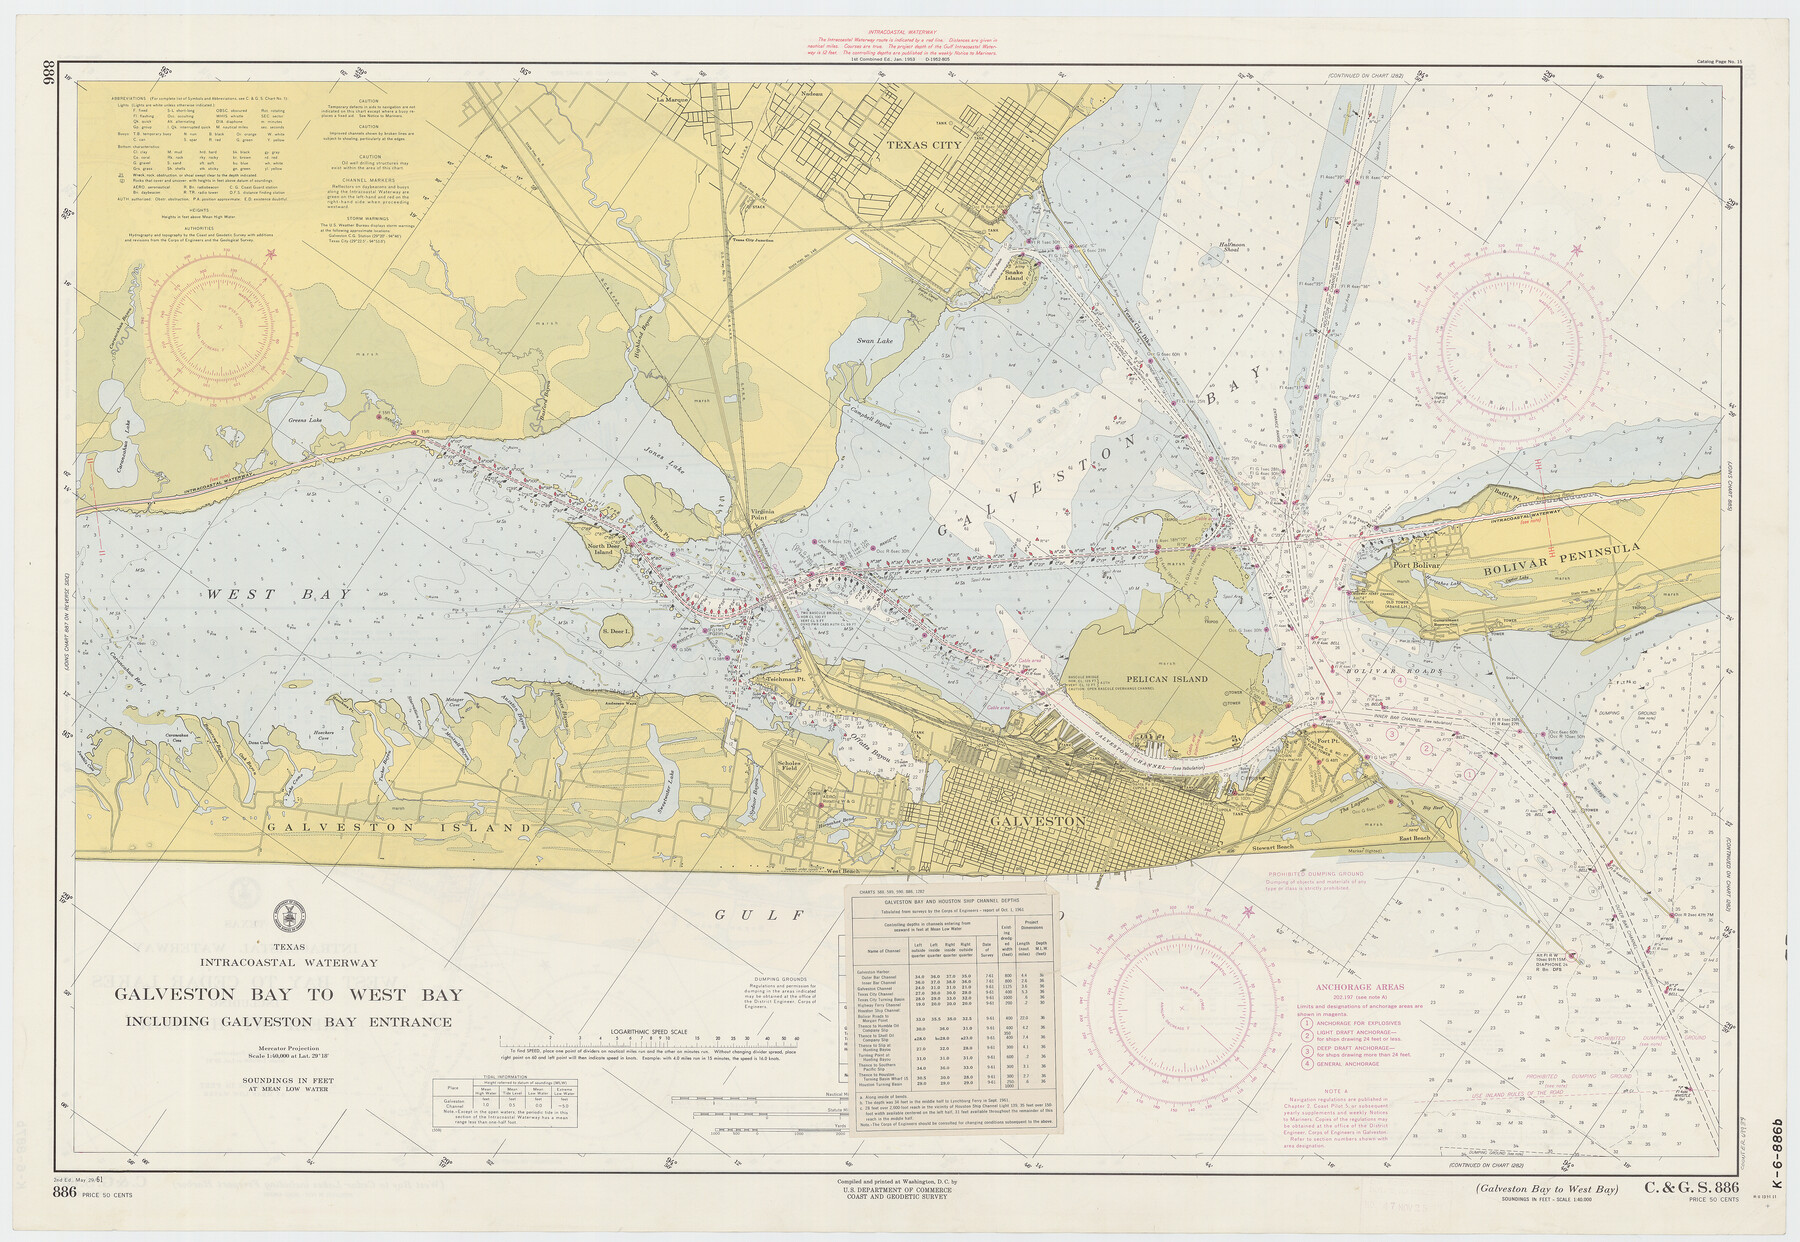 69934, Intracoastal Waterway - Galveston Bay to West Bay including Galveston Bay Entrance, General Map Collection